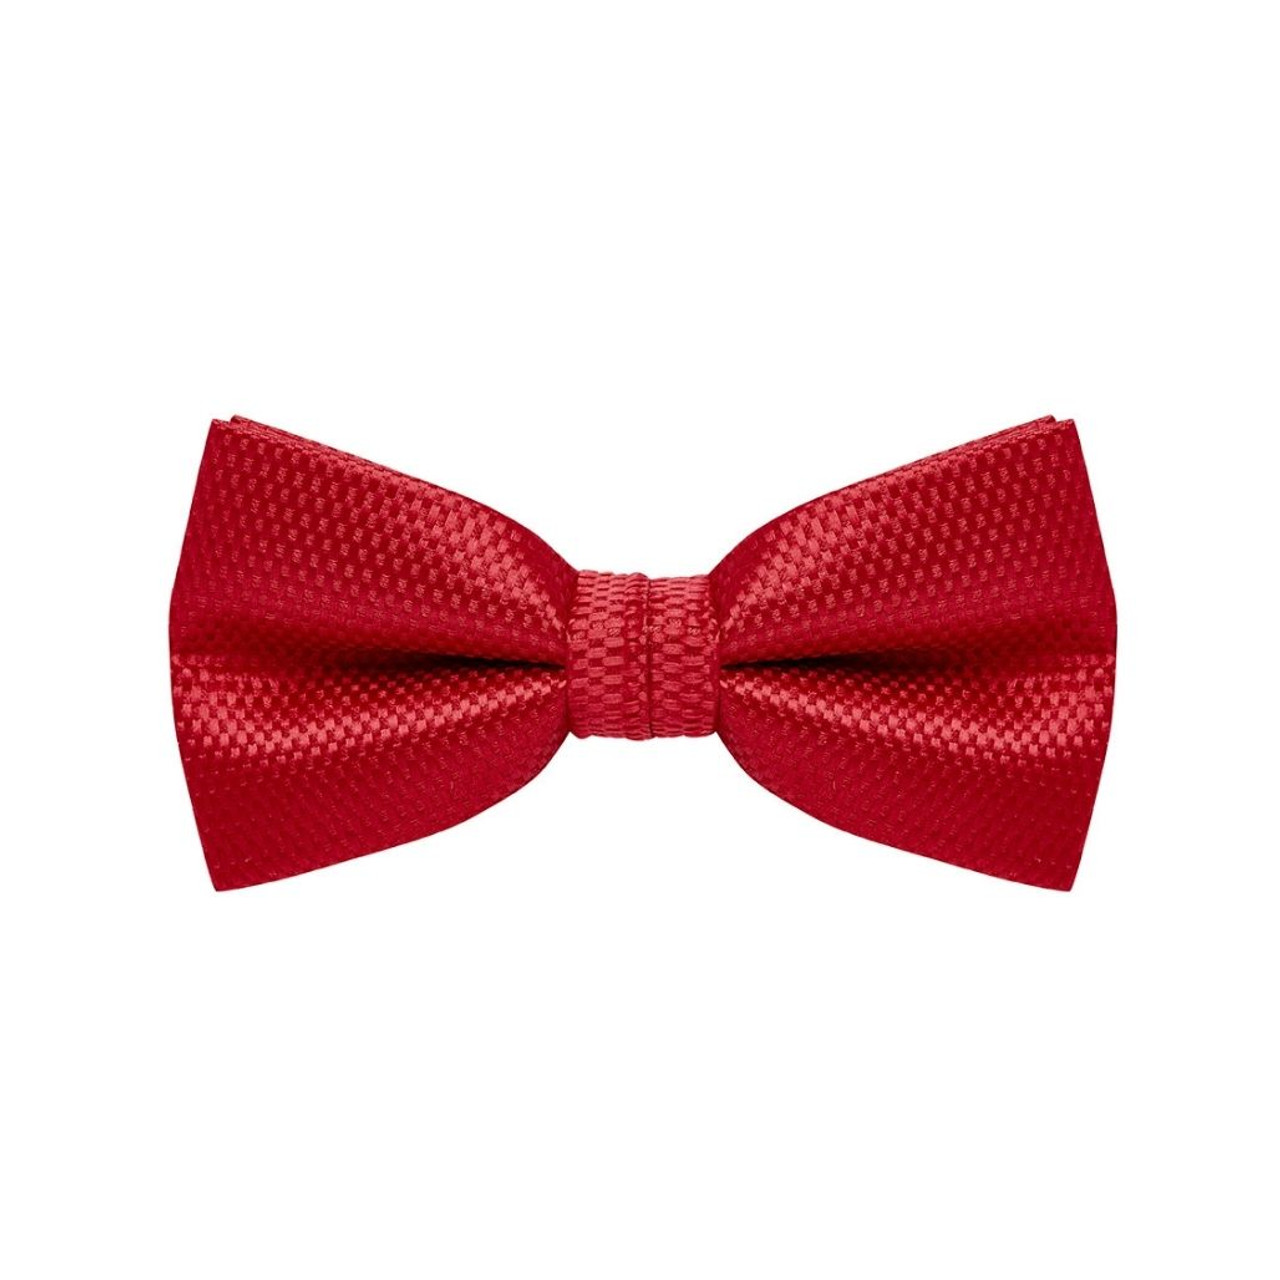 BOW TIE + POCKET SQUARE SET. Carbon. Red. Supplied with matching pocket square.